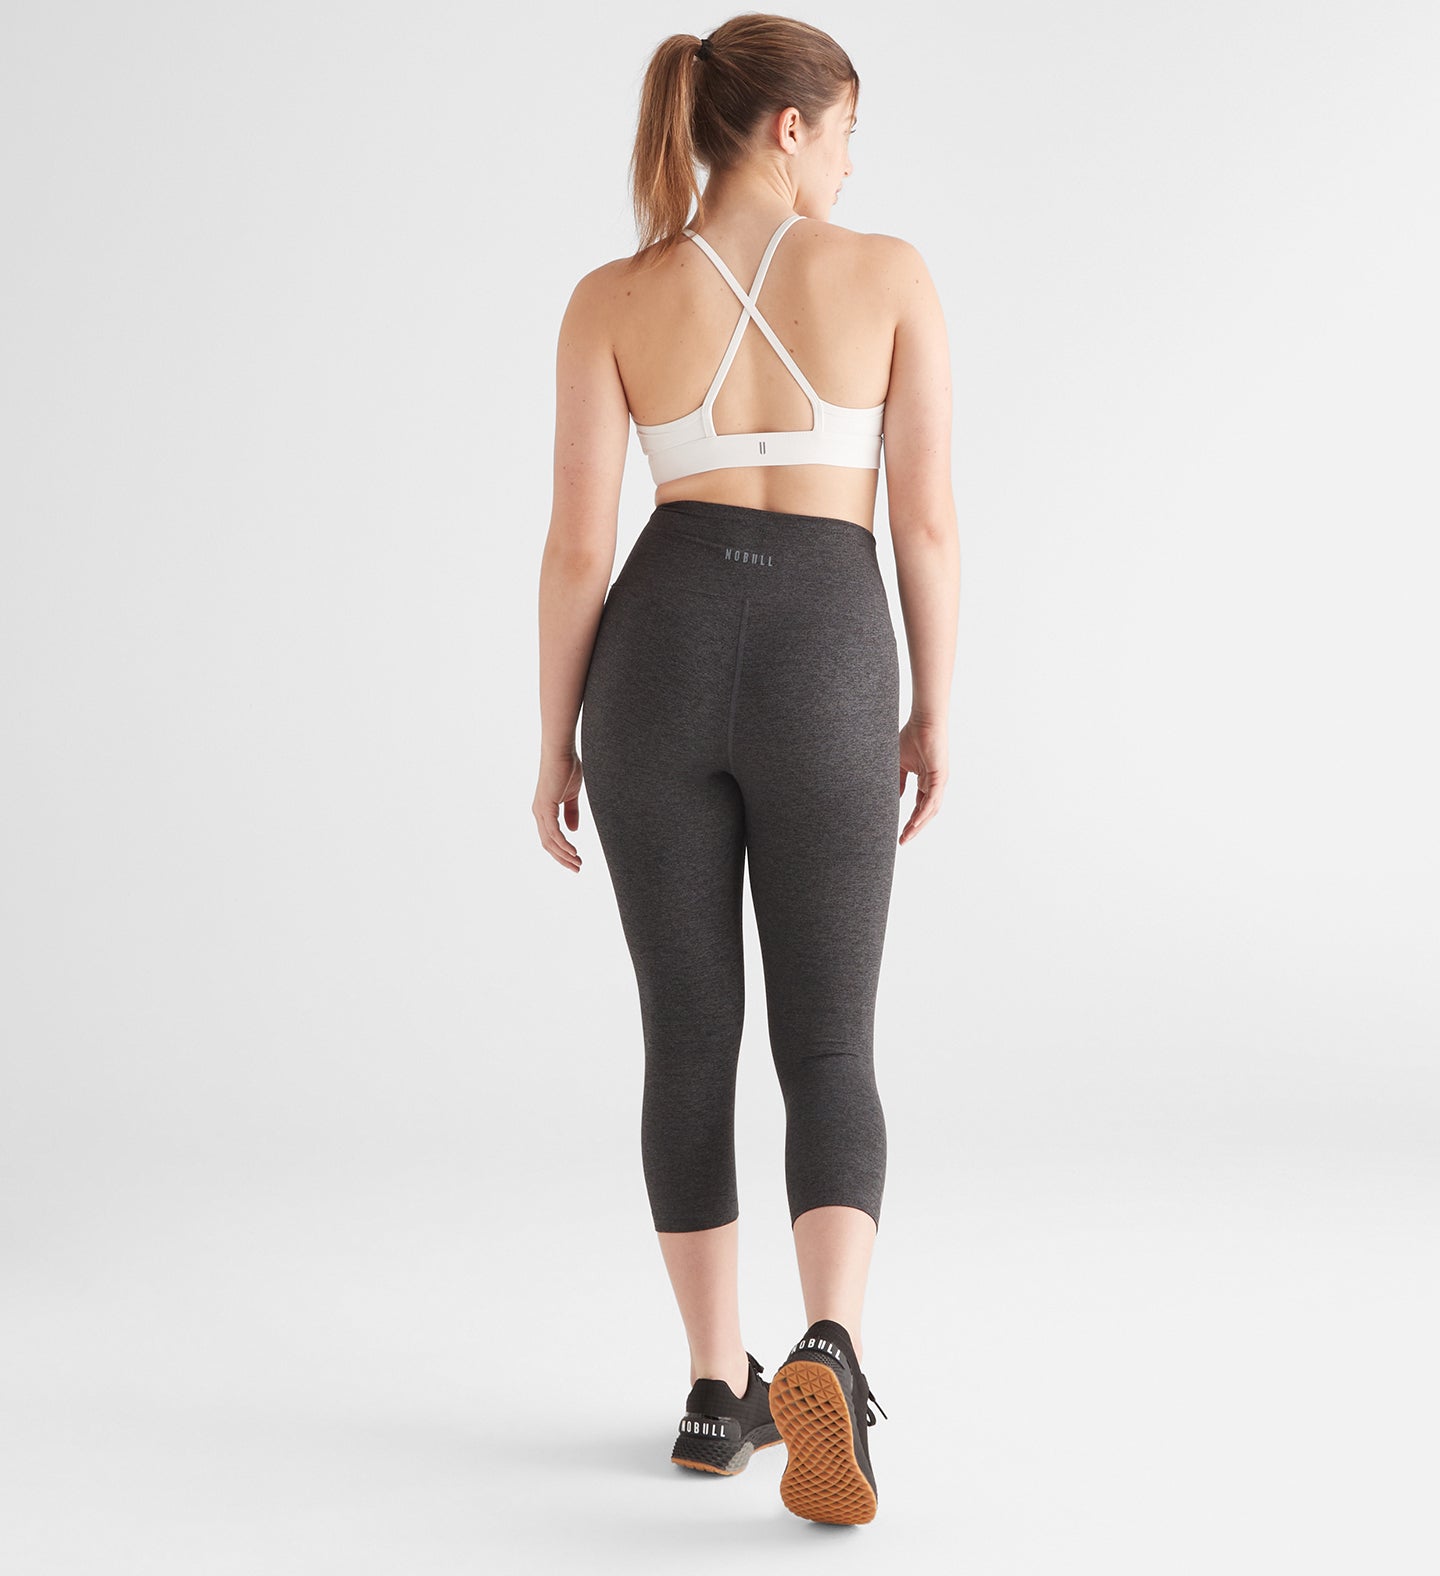 The Balance Collection Floral Compression High Waisted Leggings